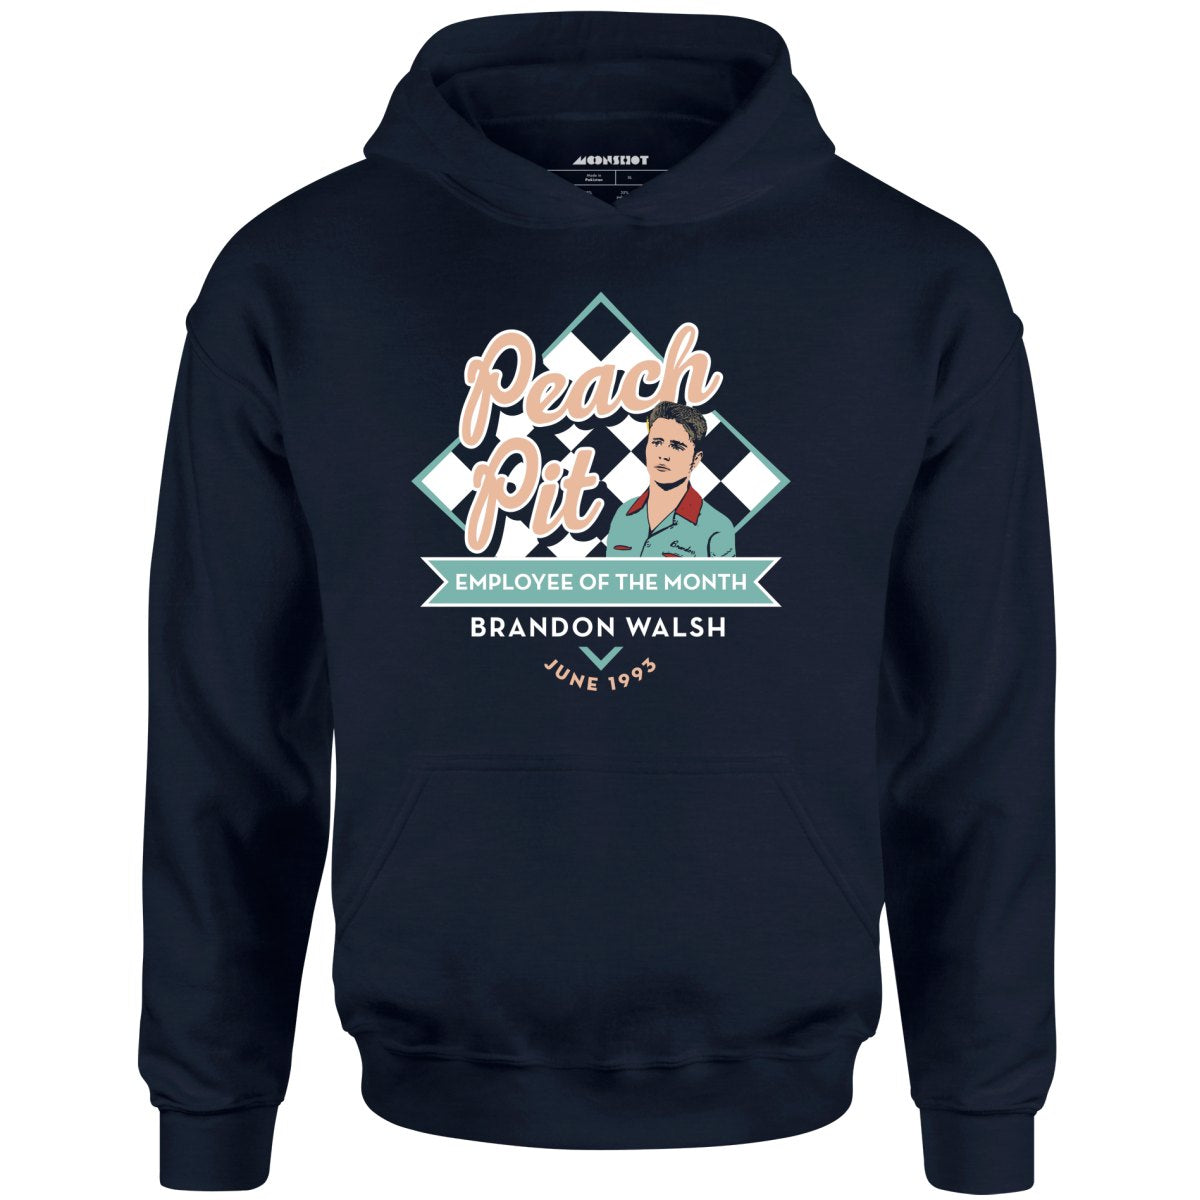 Peach Pit Employee of The Month - 90210 - Unisex Hoodie